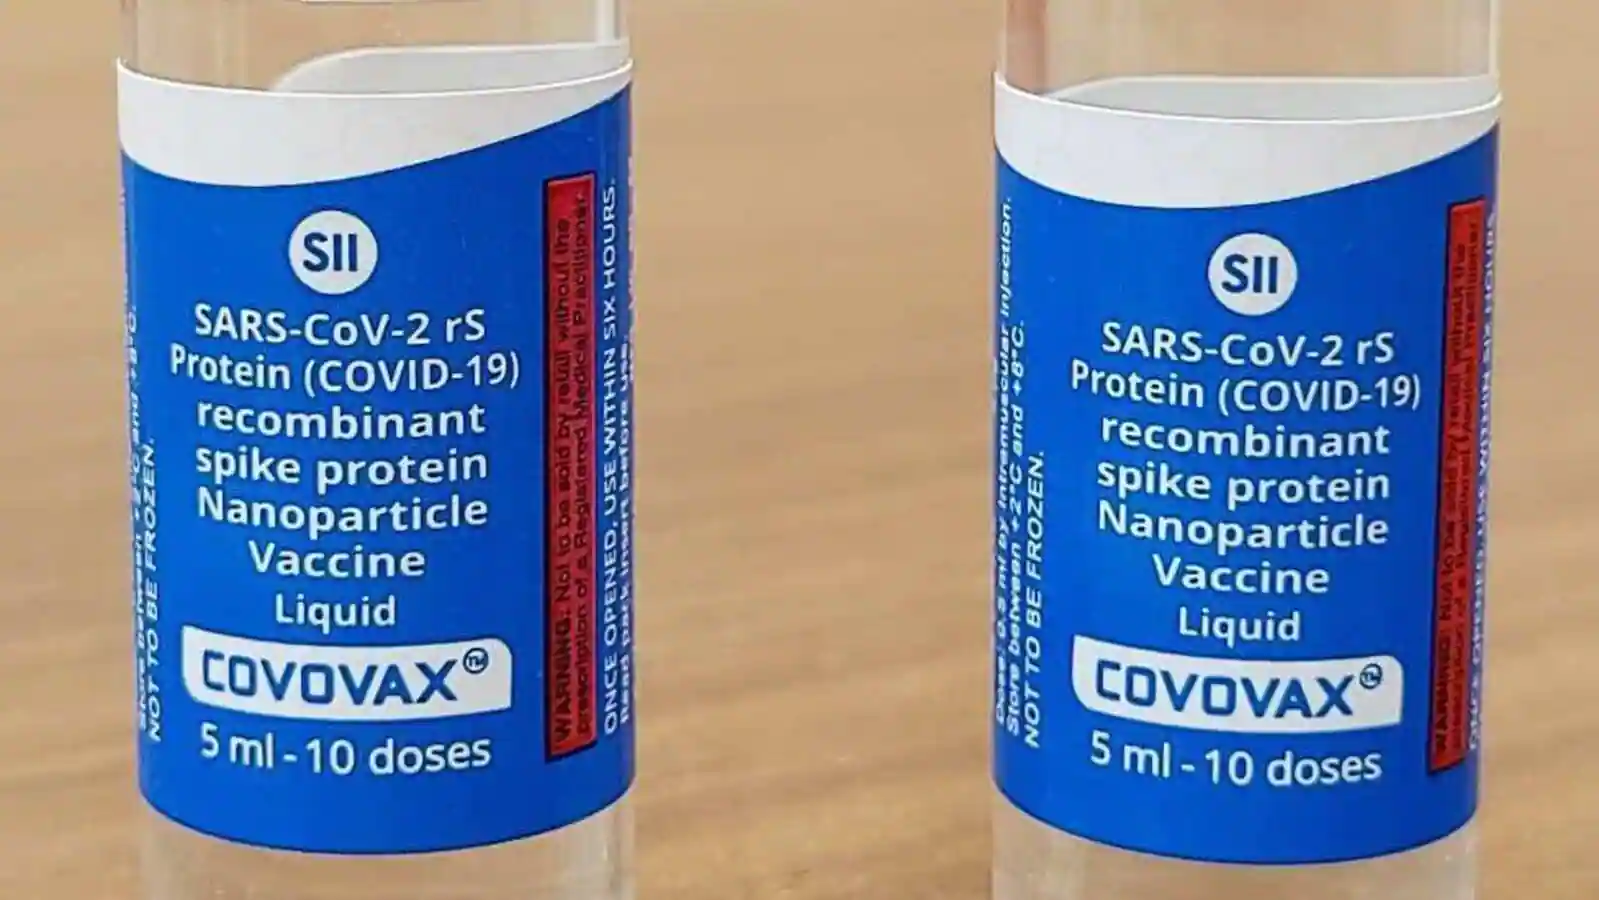 Covovax to be approved as Covid-19 booster in 10-15 days: Adar Poonawalla